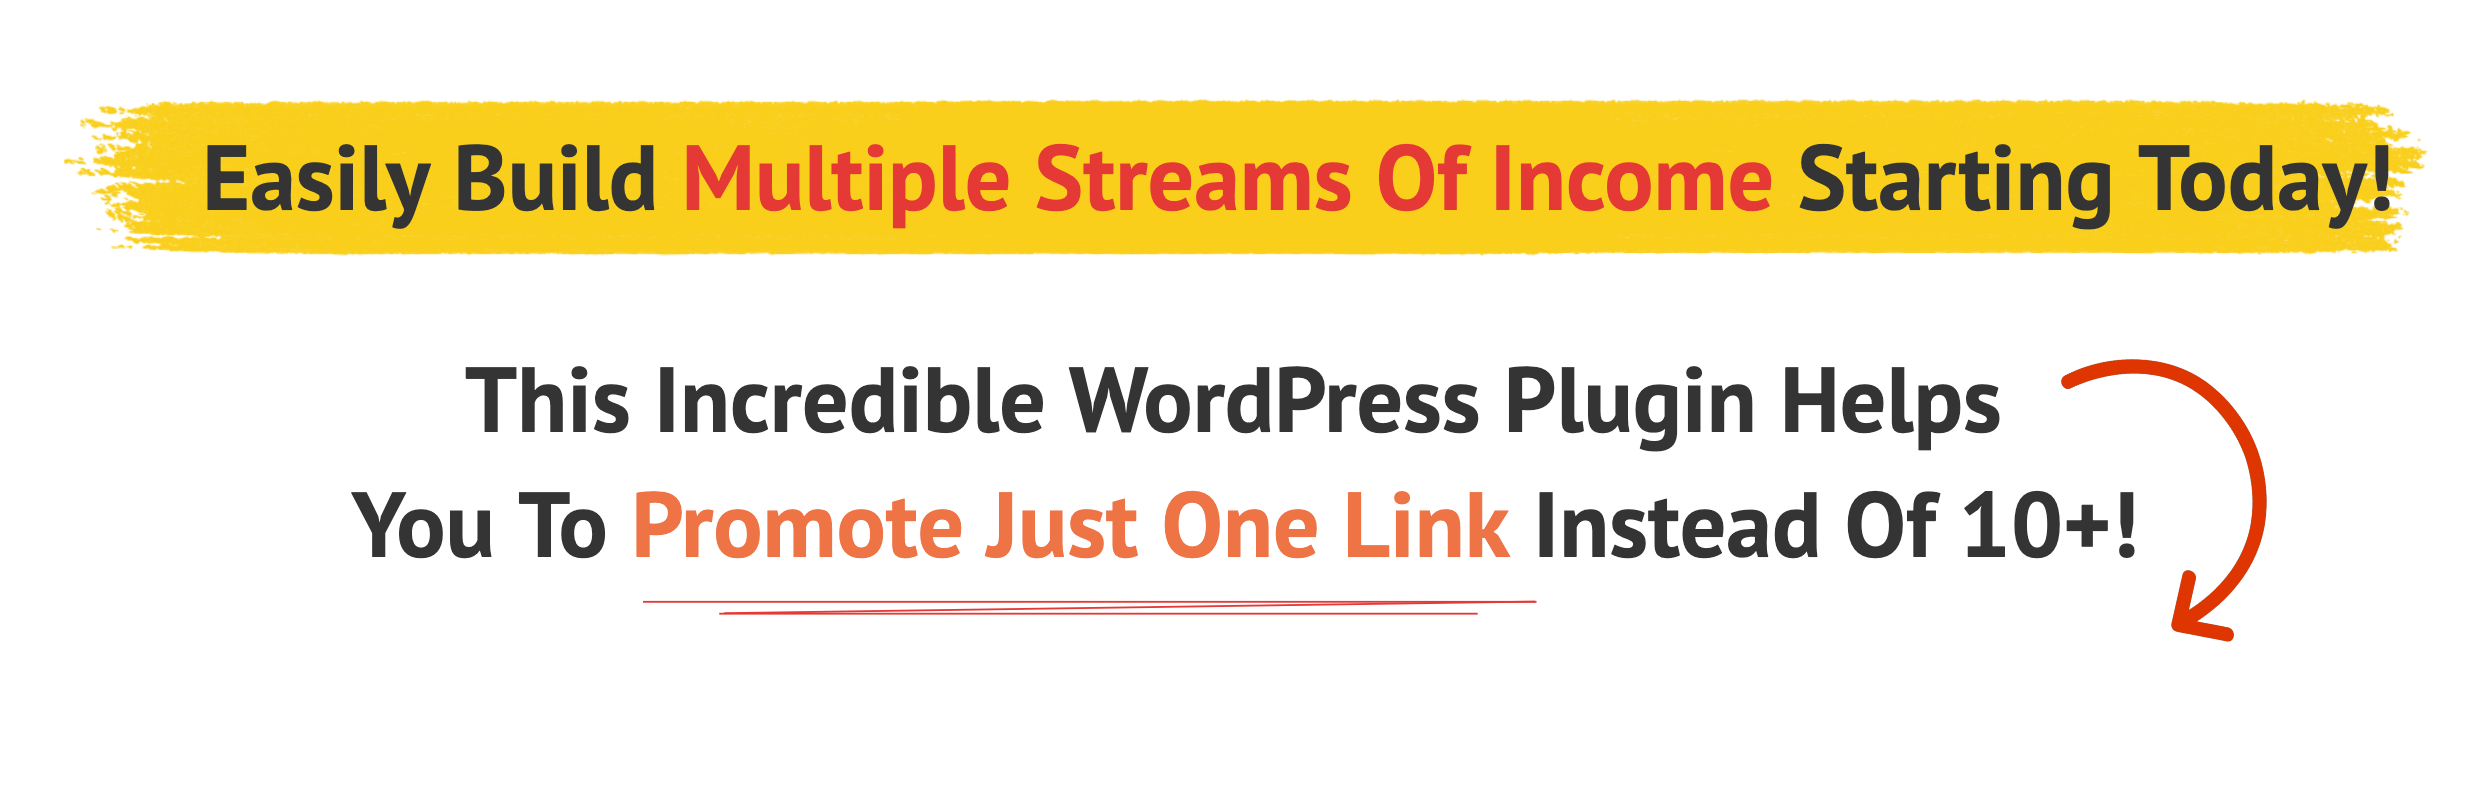 Build Multiple Streams Of Income With Ease - Promote Just One Link Instead Of 10!